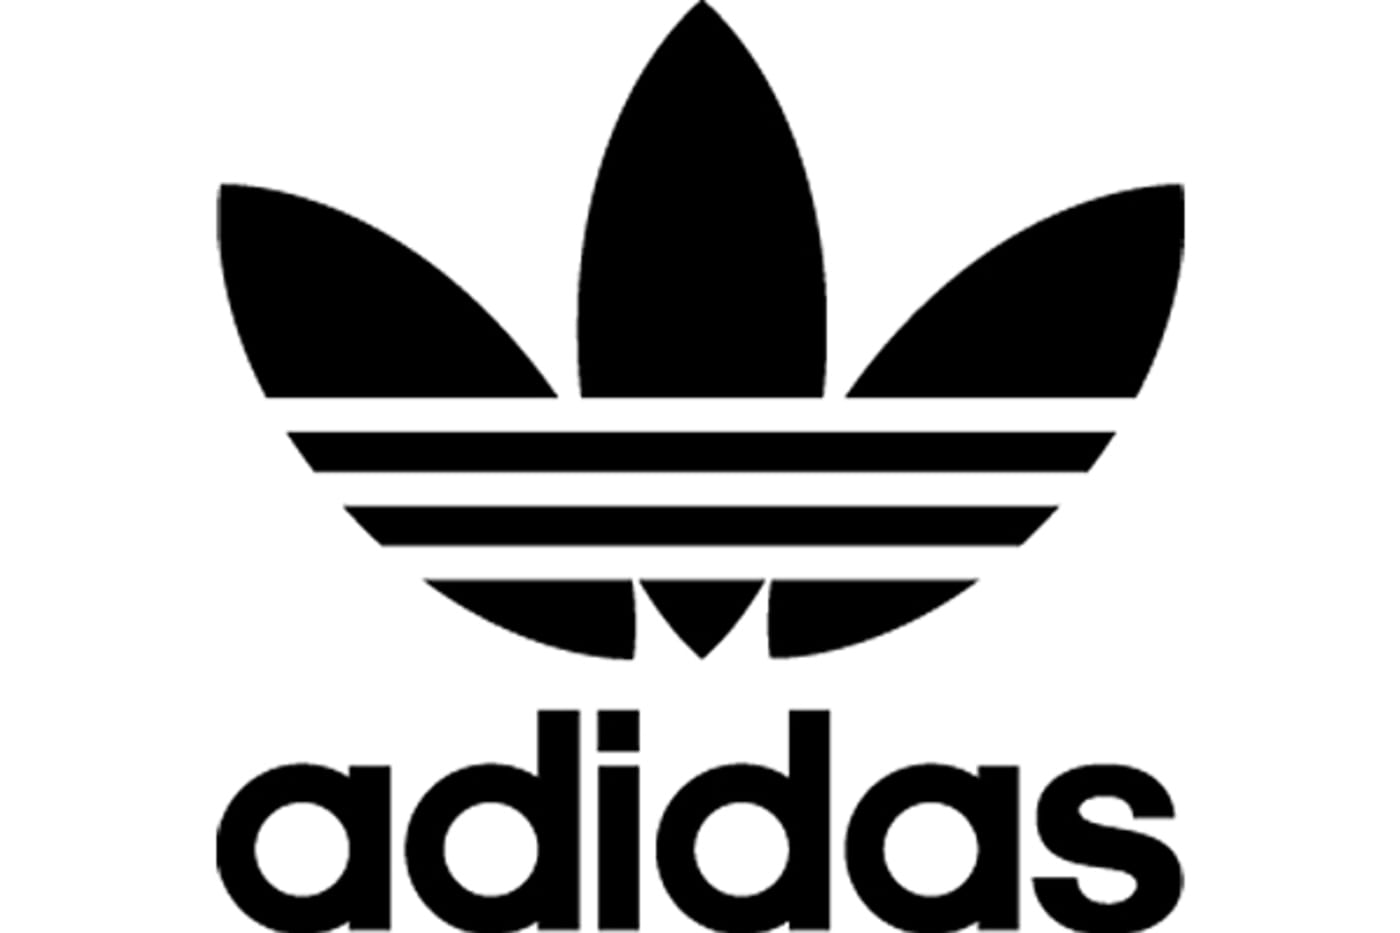 trefoil adidas meaning